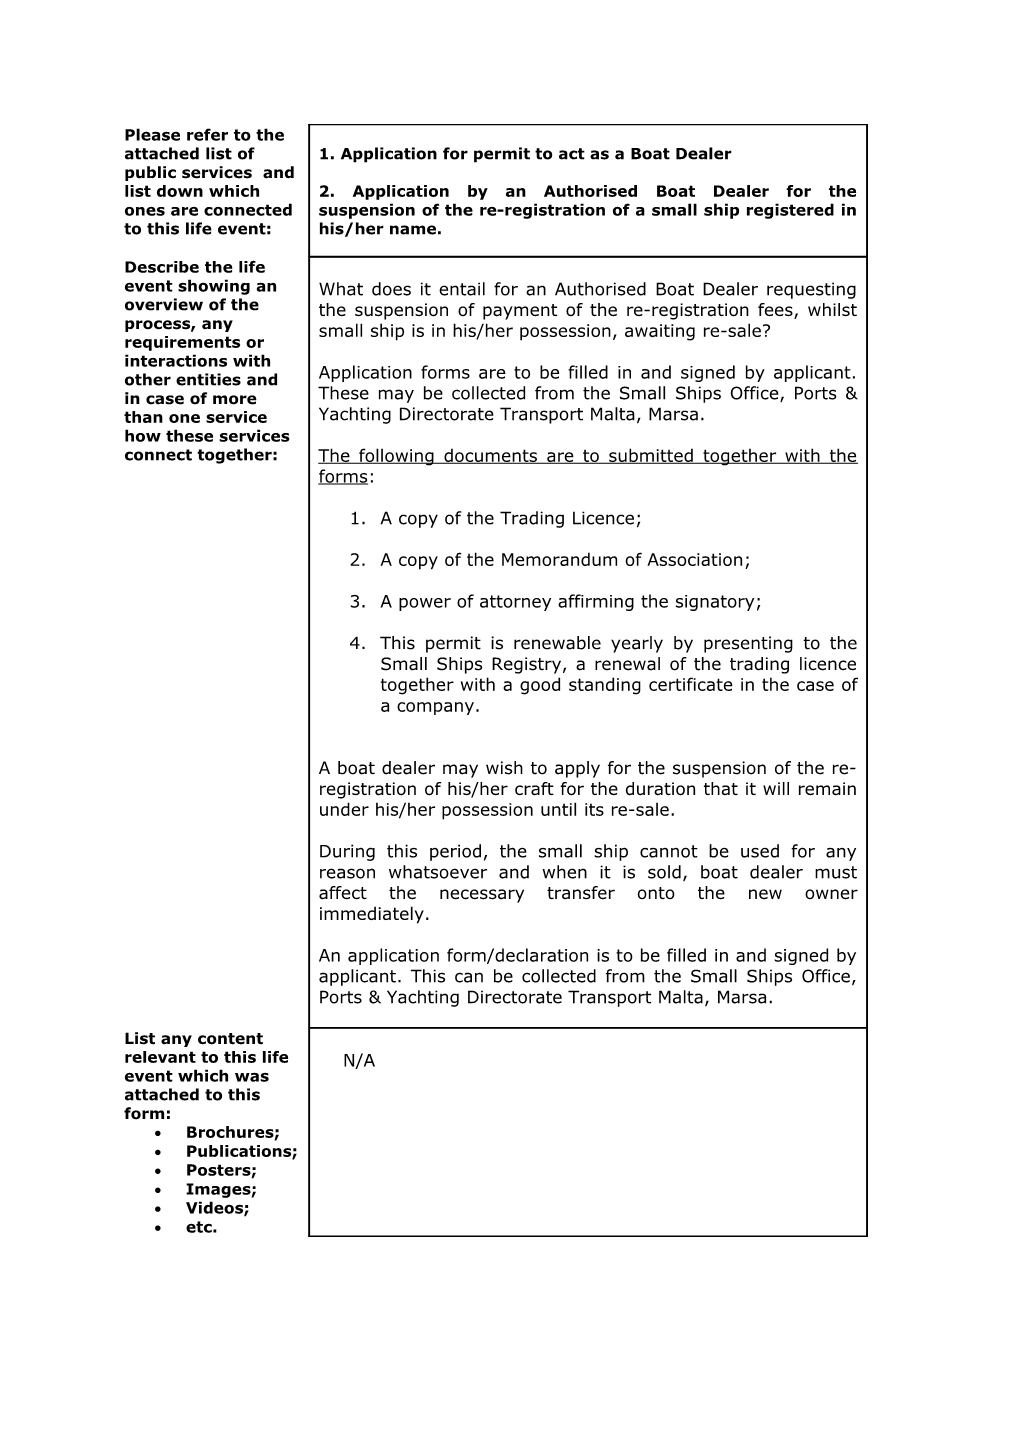 A Copy of the Trading Licence;